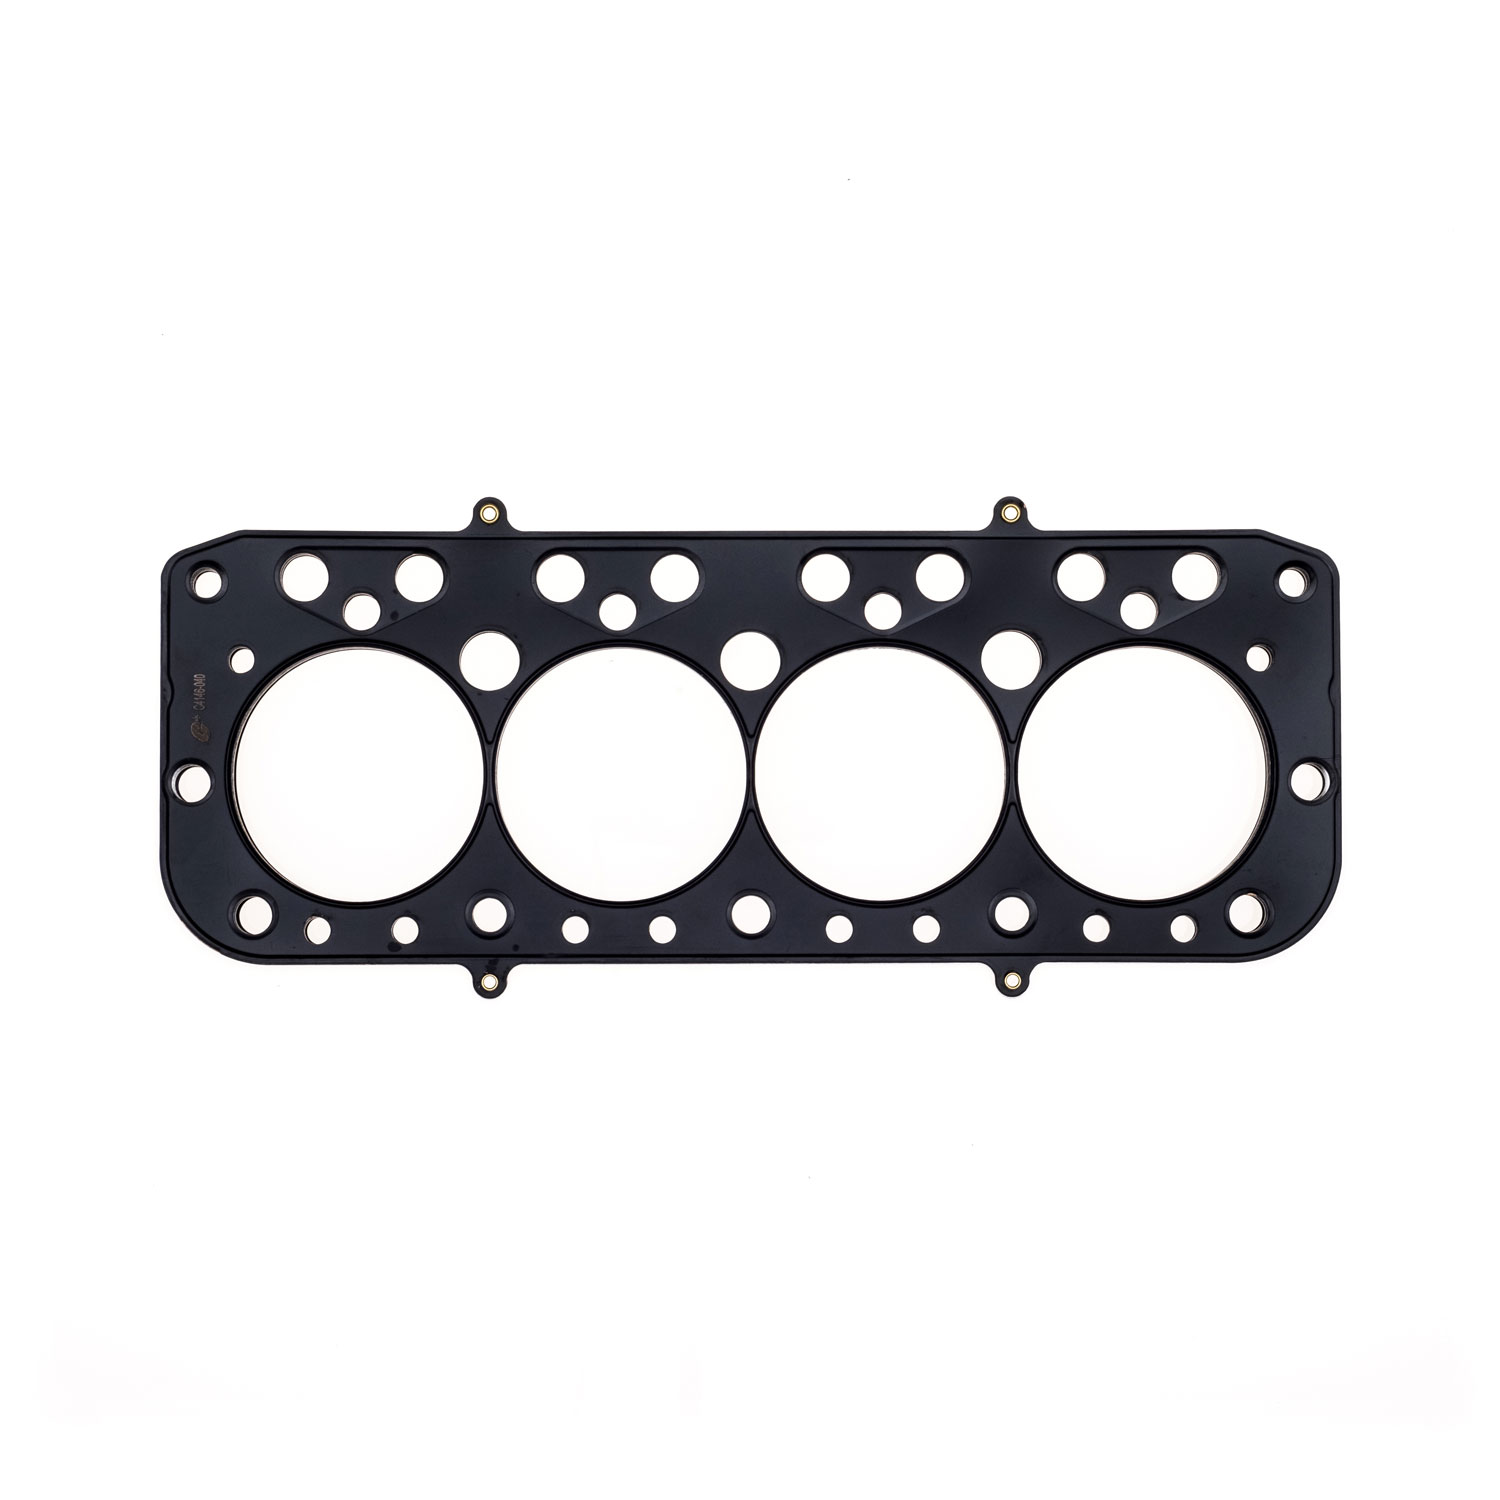 Cometic Automotive BMC 1275 A Series/A+ Series Cylinder Head Gasket